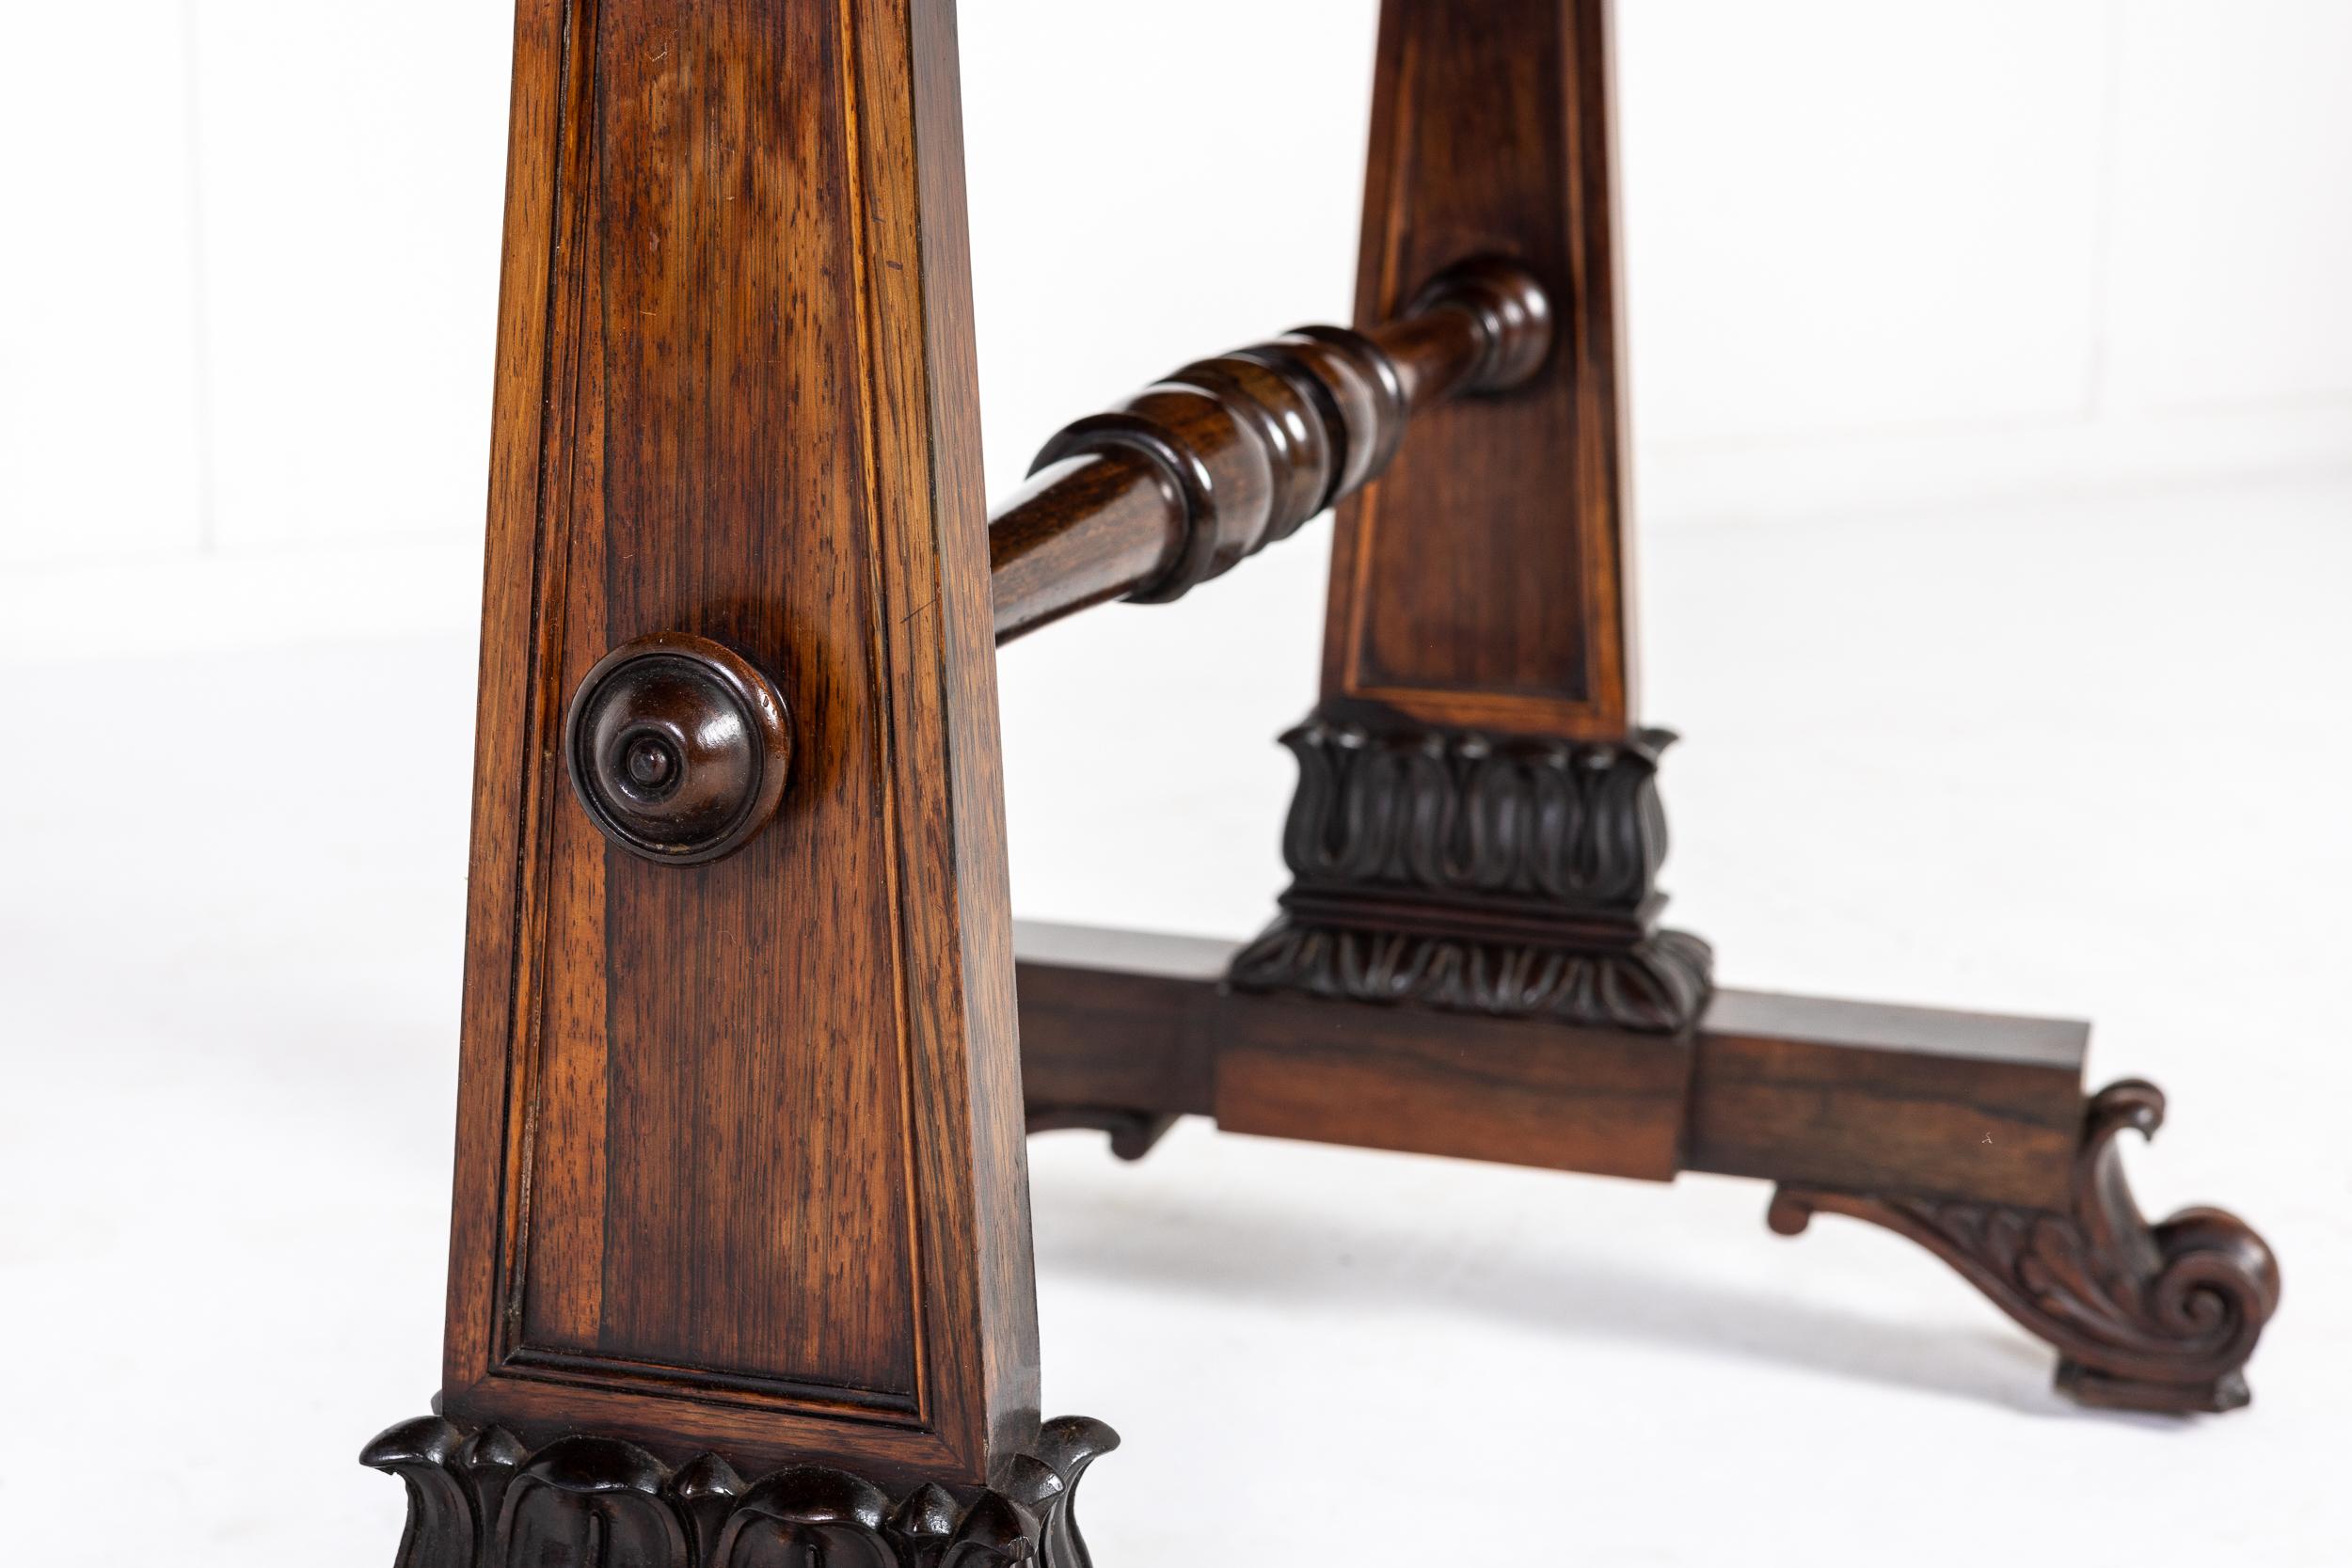 19th Century Rosewood Writing Table For Sale 5